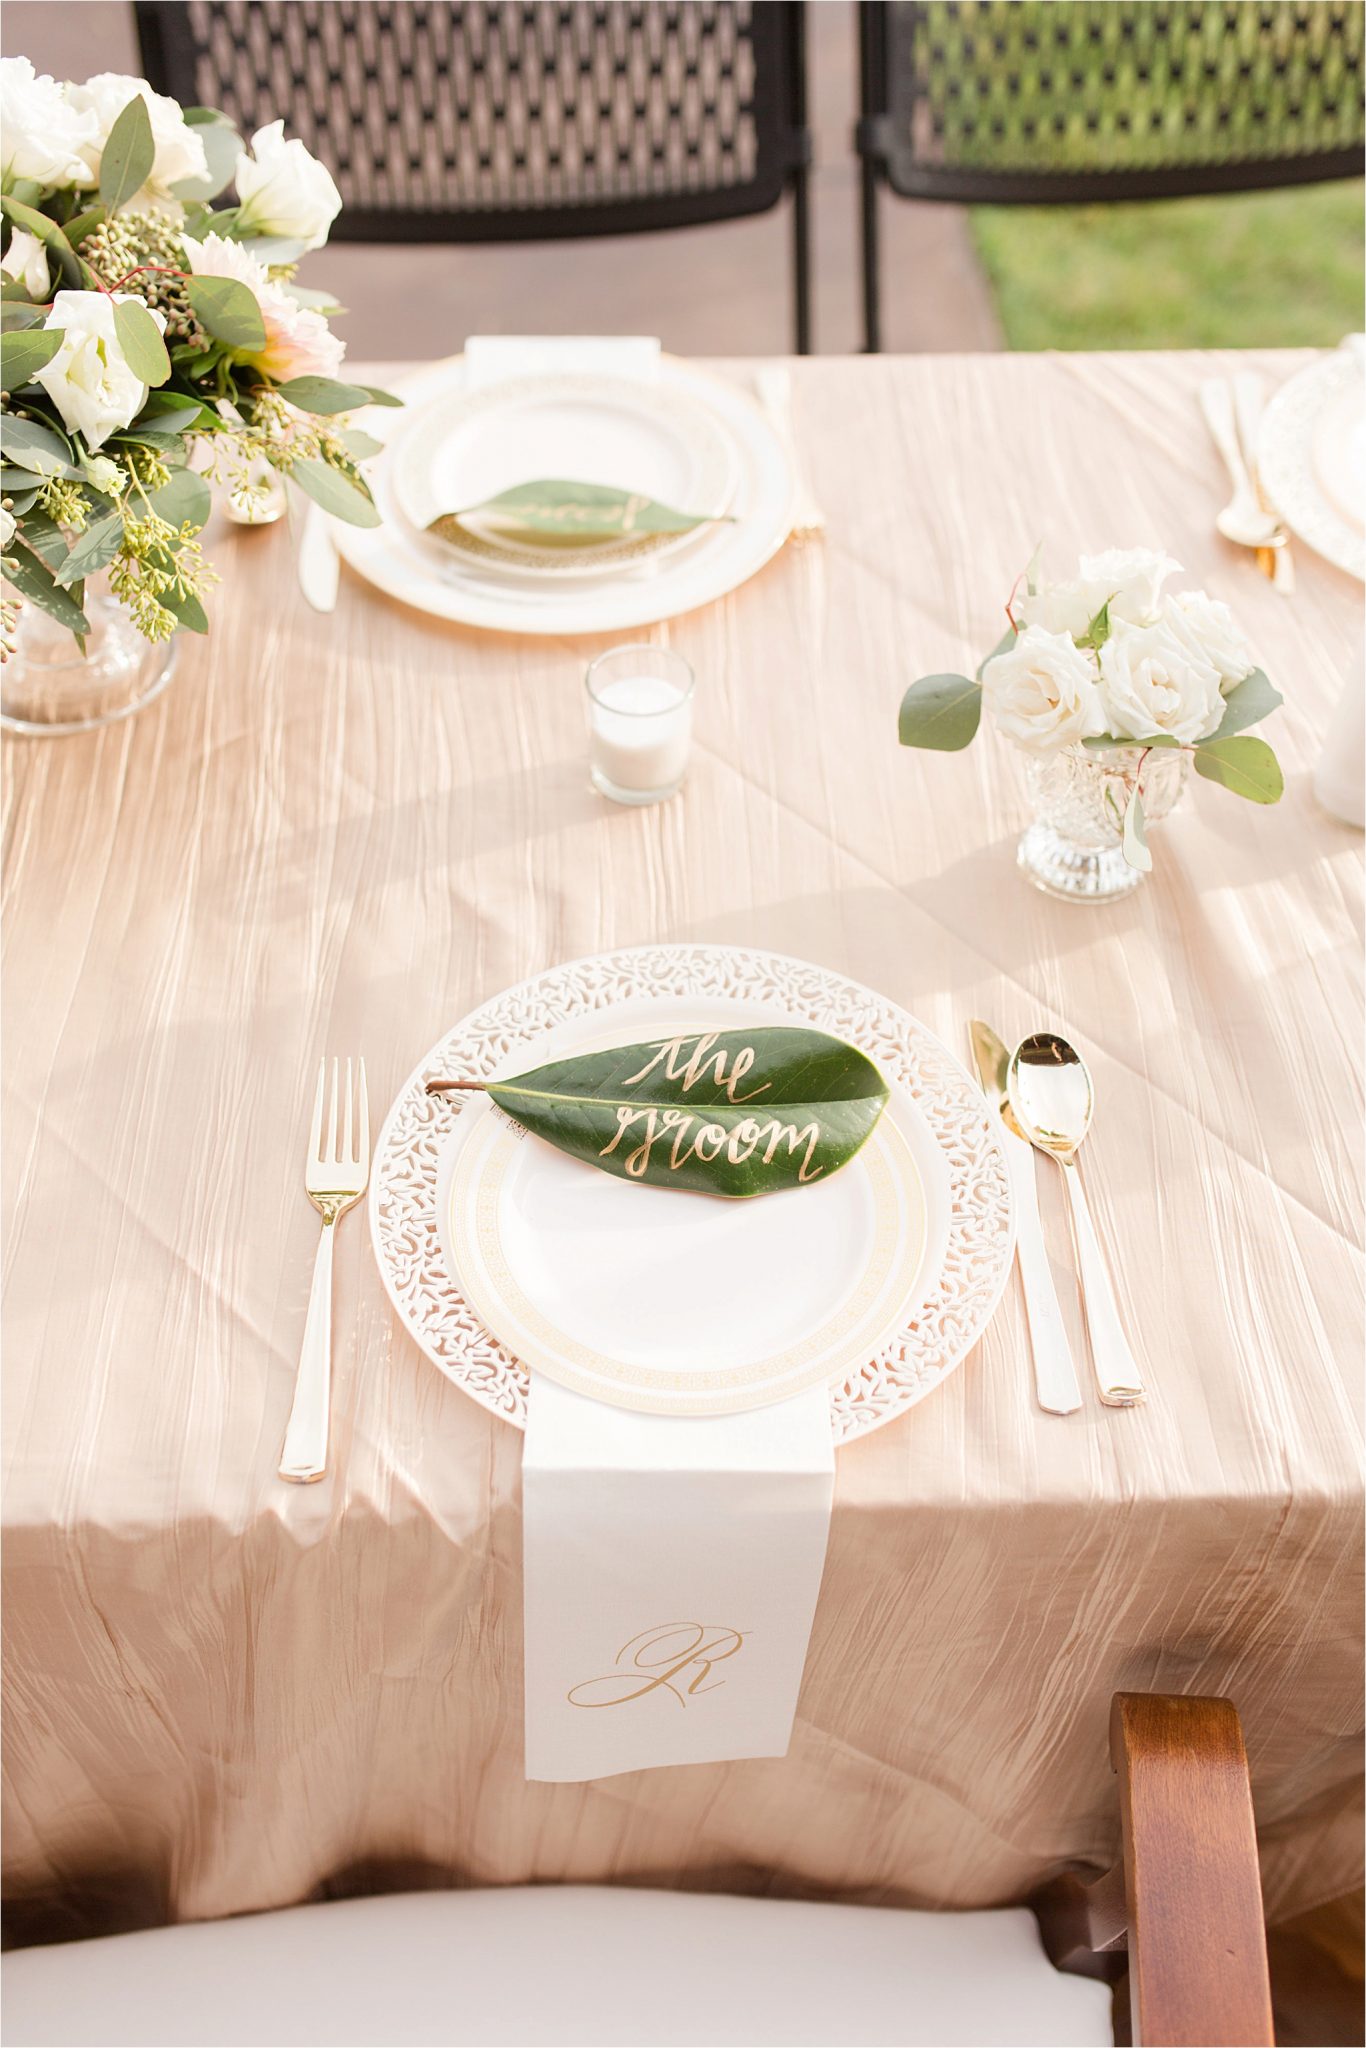 wedding-reception-magnolia-leaves-place-setting-groom-champagne-blushes-nuetrals-white-roses